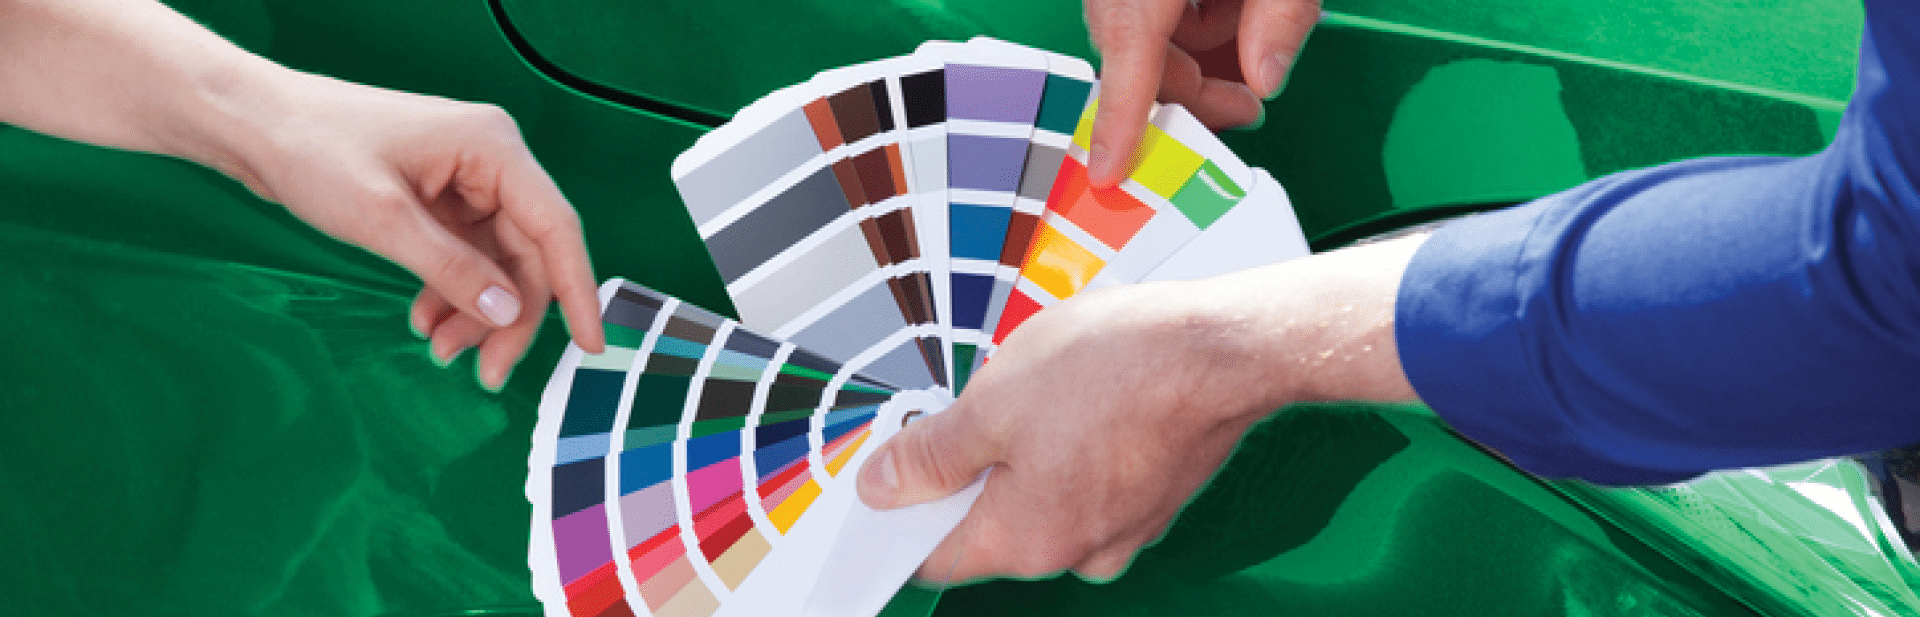 Cropped image of mechanic showing color samples to customer against car